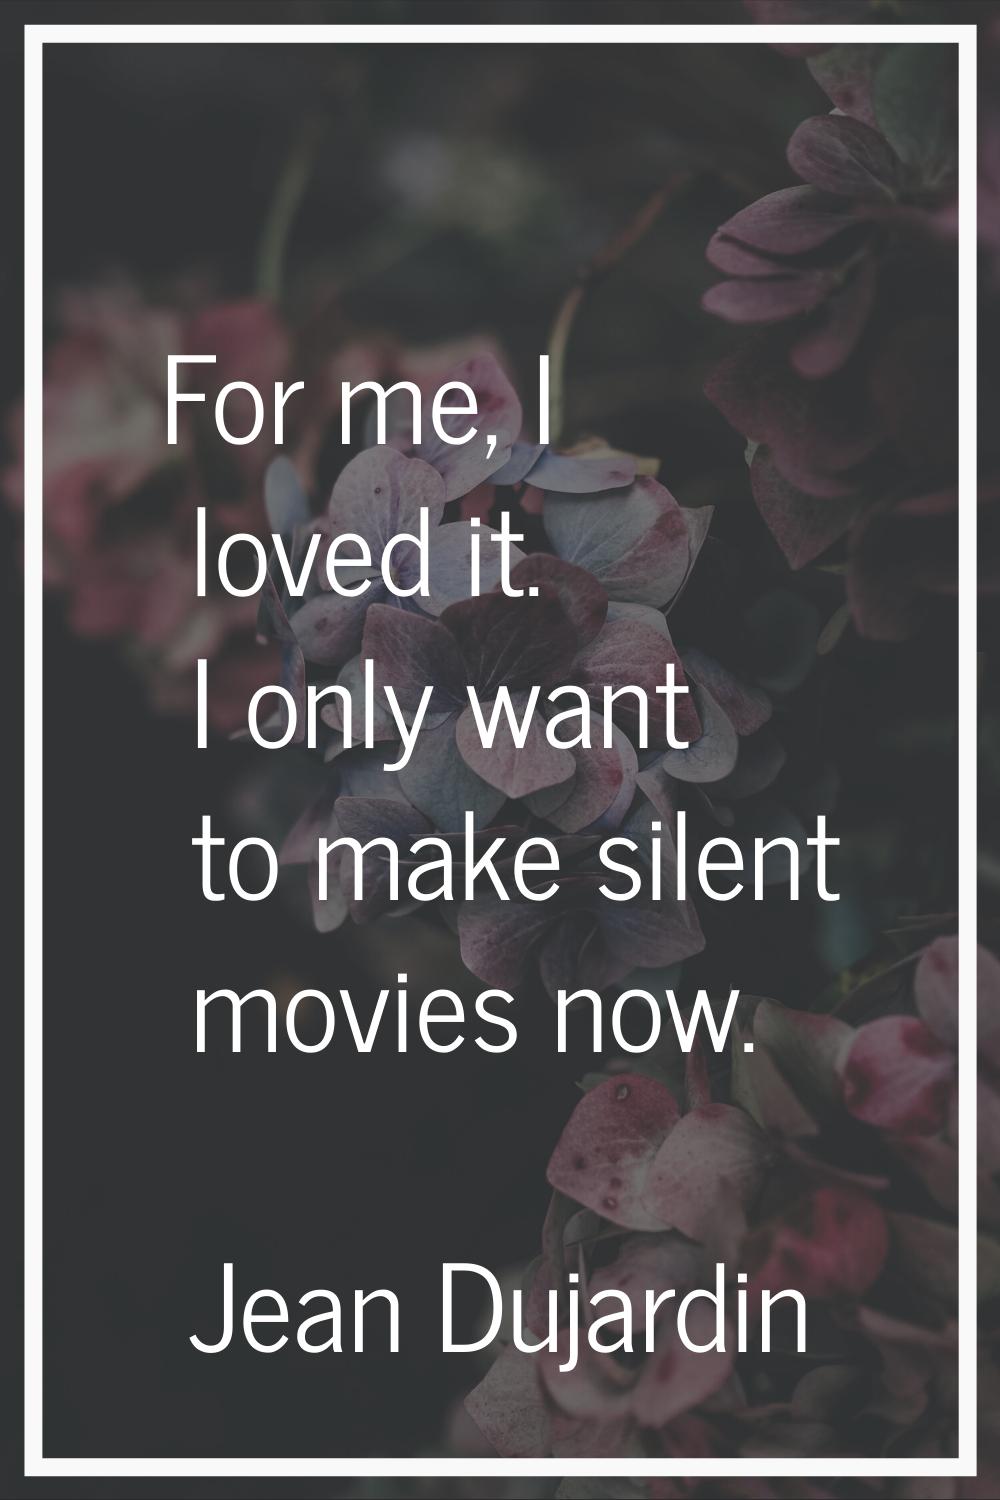 For me, I loved it. I only want to make silent movies now.